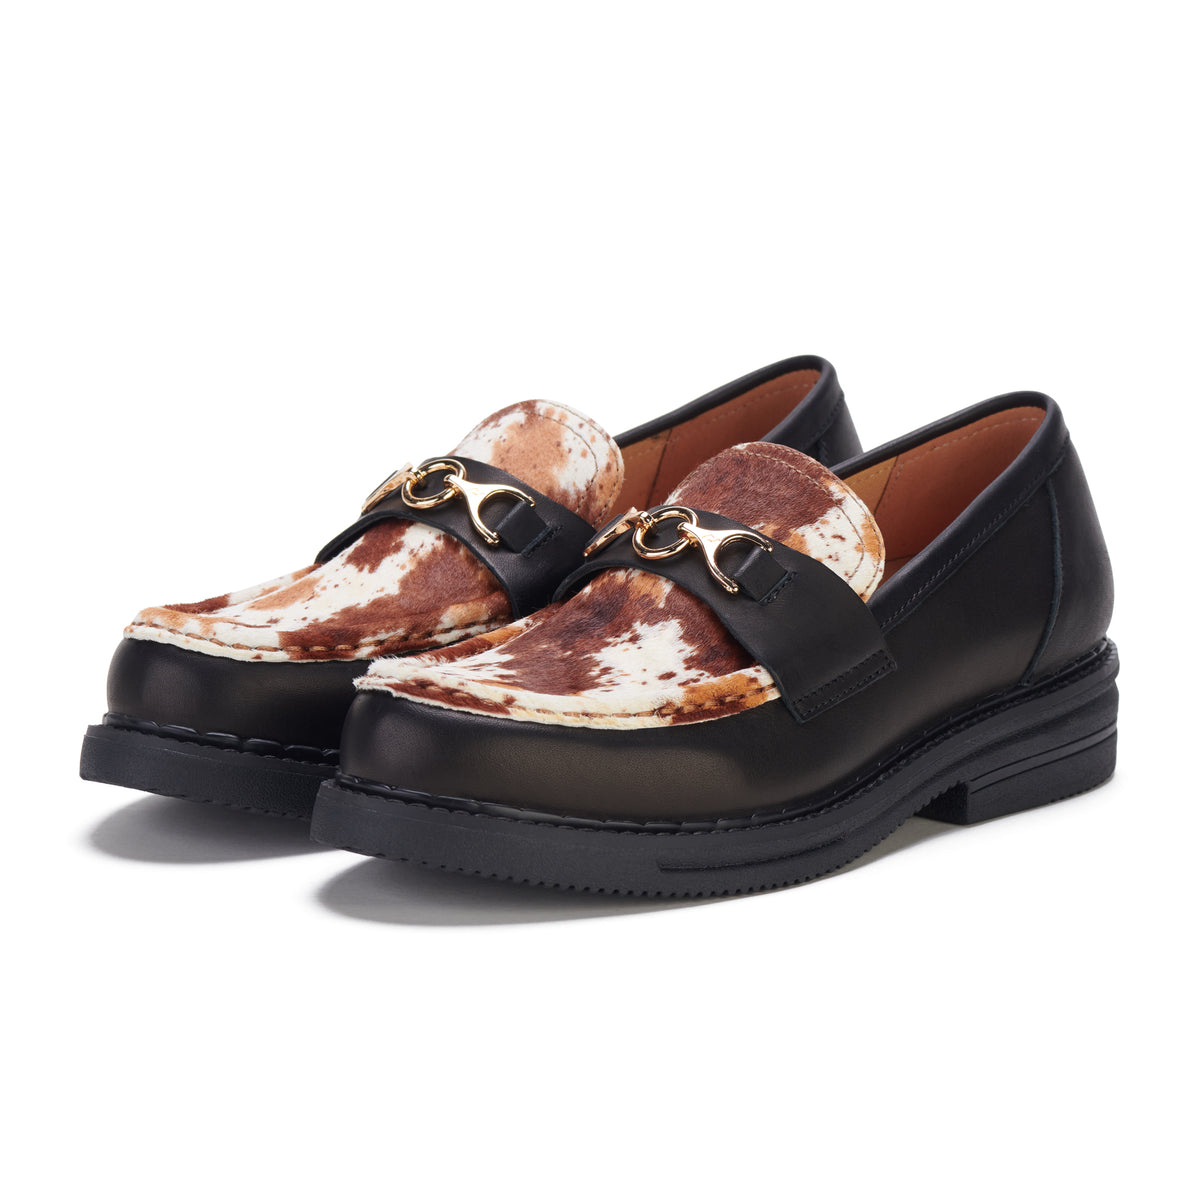 Loafer Rise Black/Brown Cow